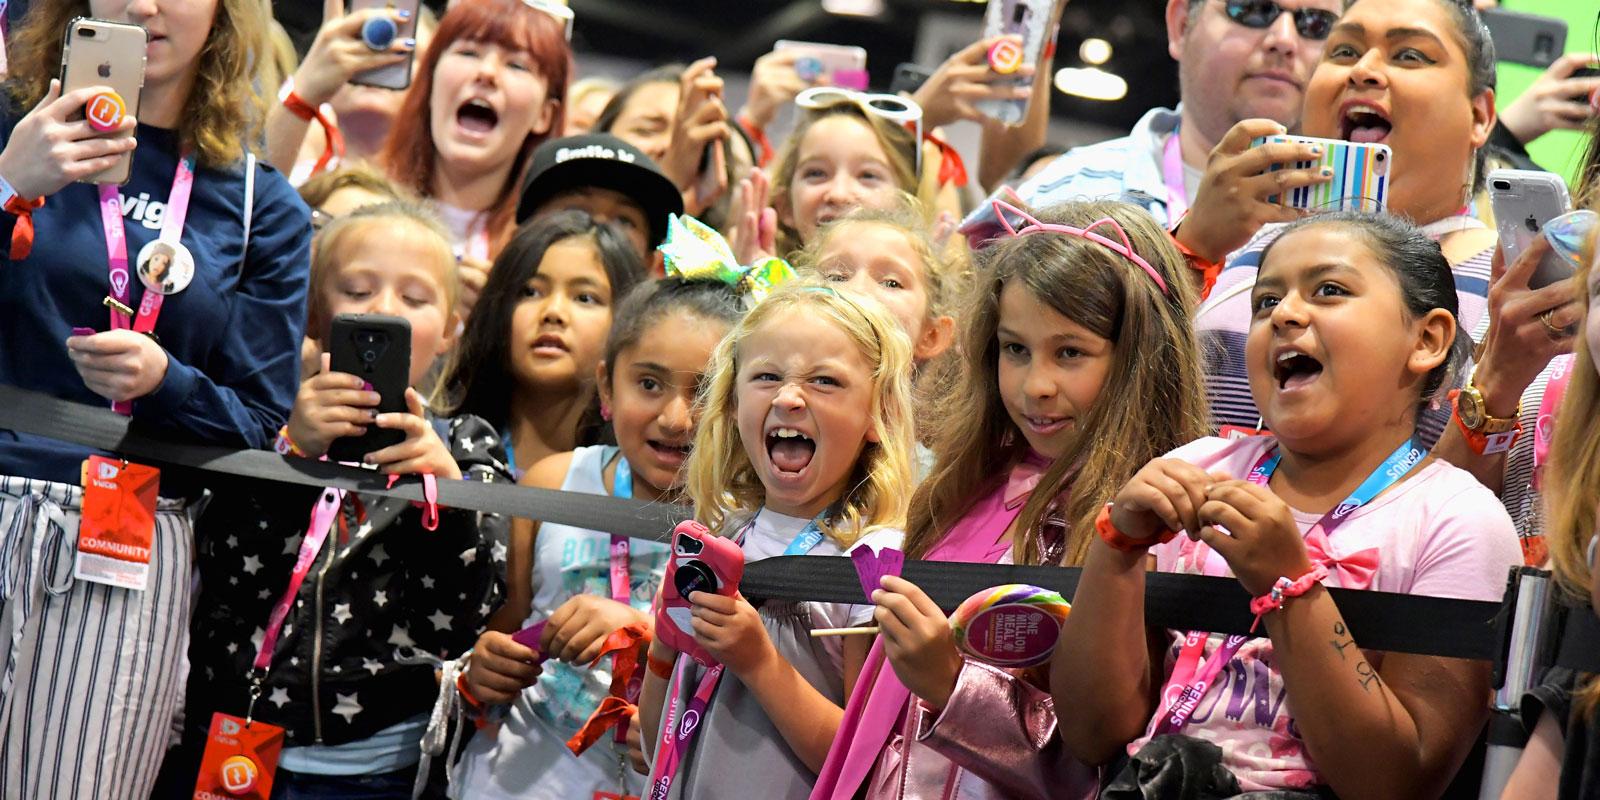 At VidCon, IRL Fun is a Gateway to Digital Fame